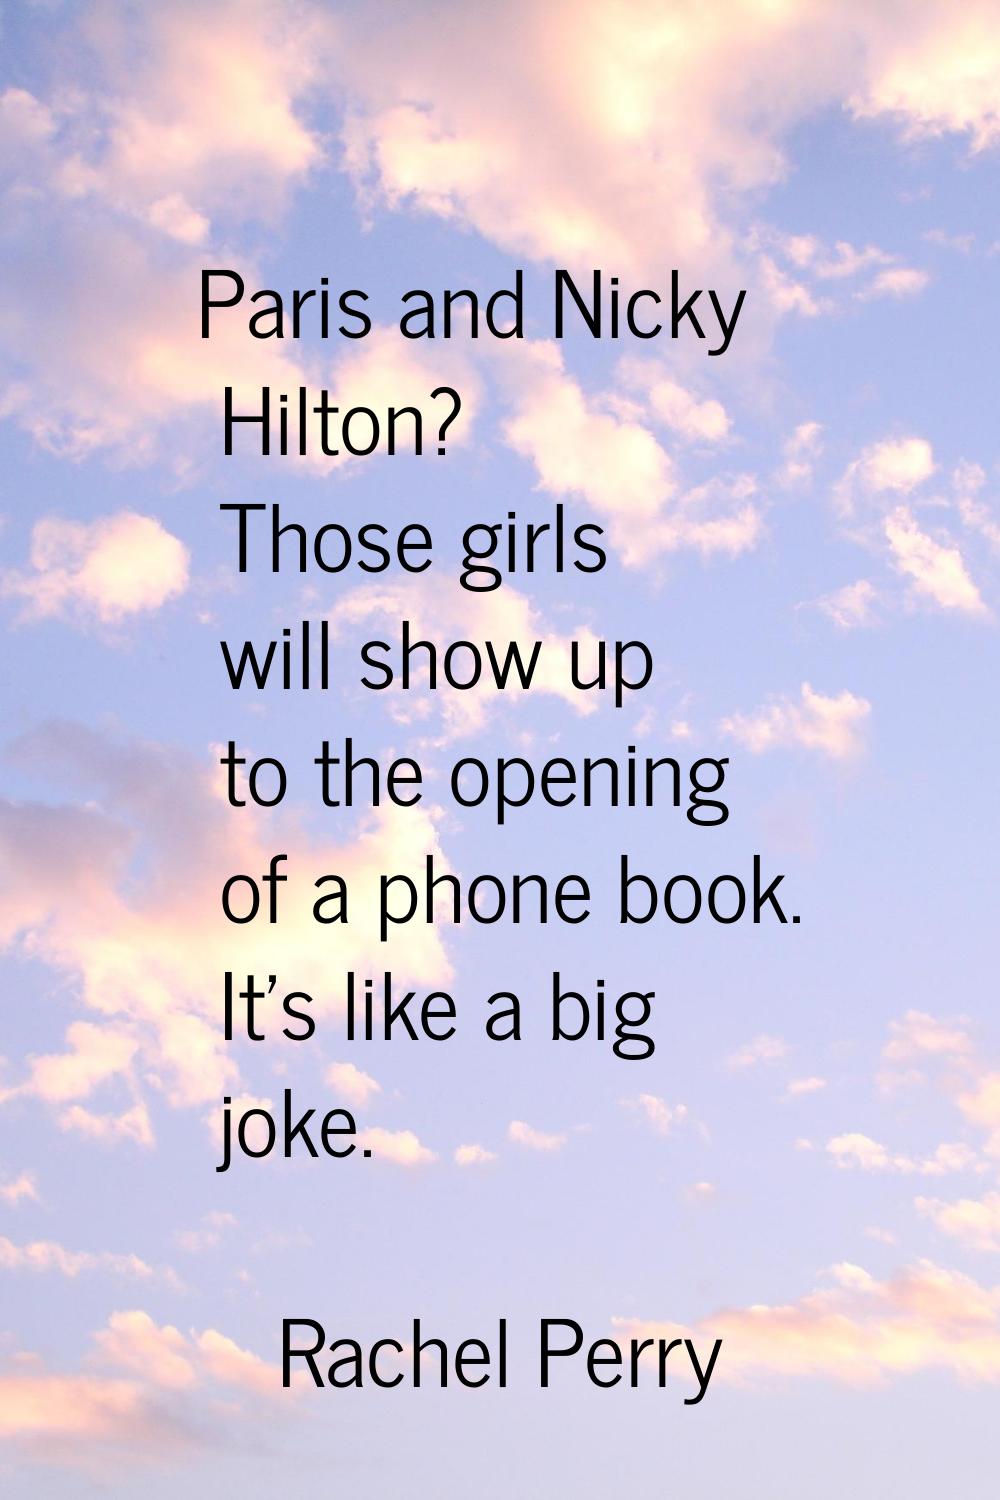 Paris and Nicky Hilton? Those girls will show up to the opening of a phone book. It's like a big jo